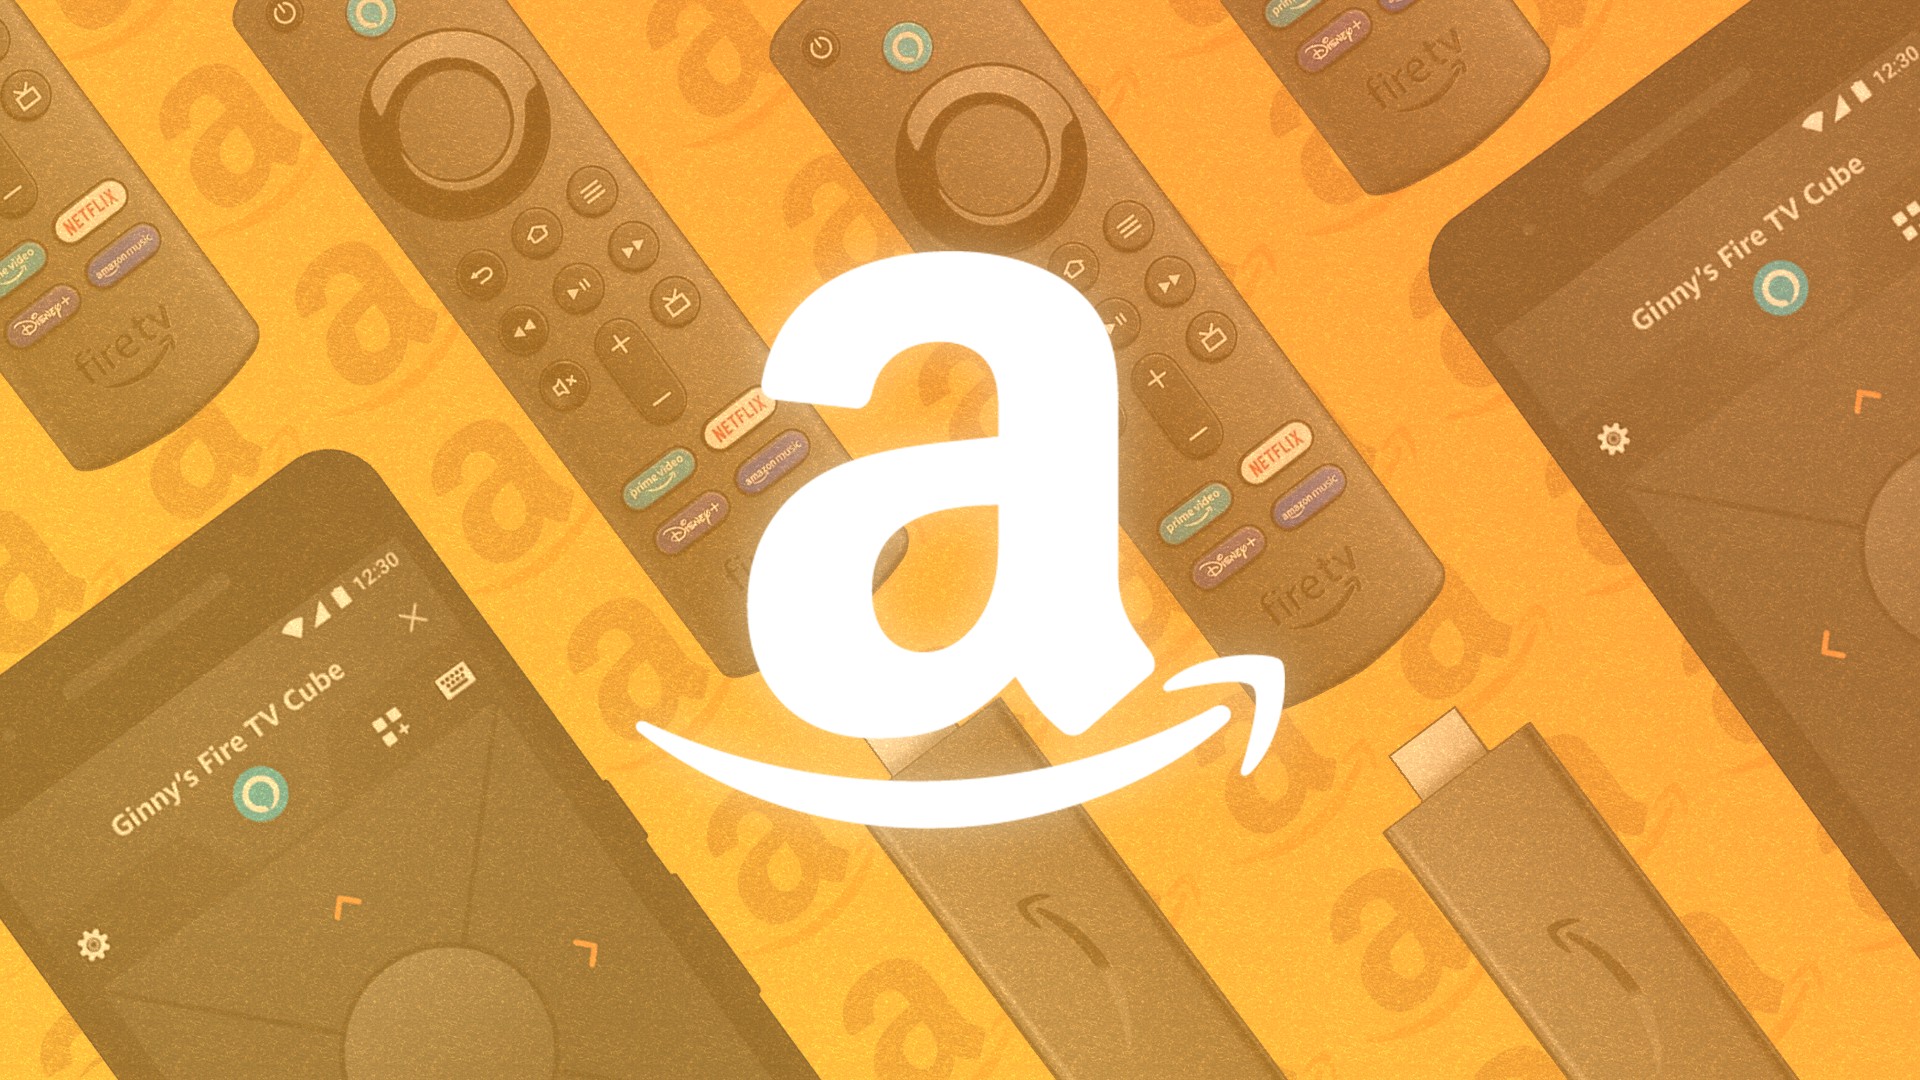 Amazon Fire TV is teasing users with new full-screen autoplay ads